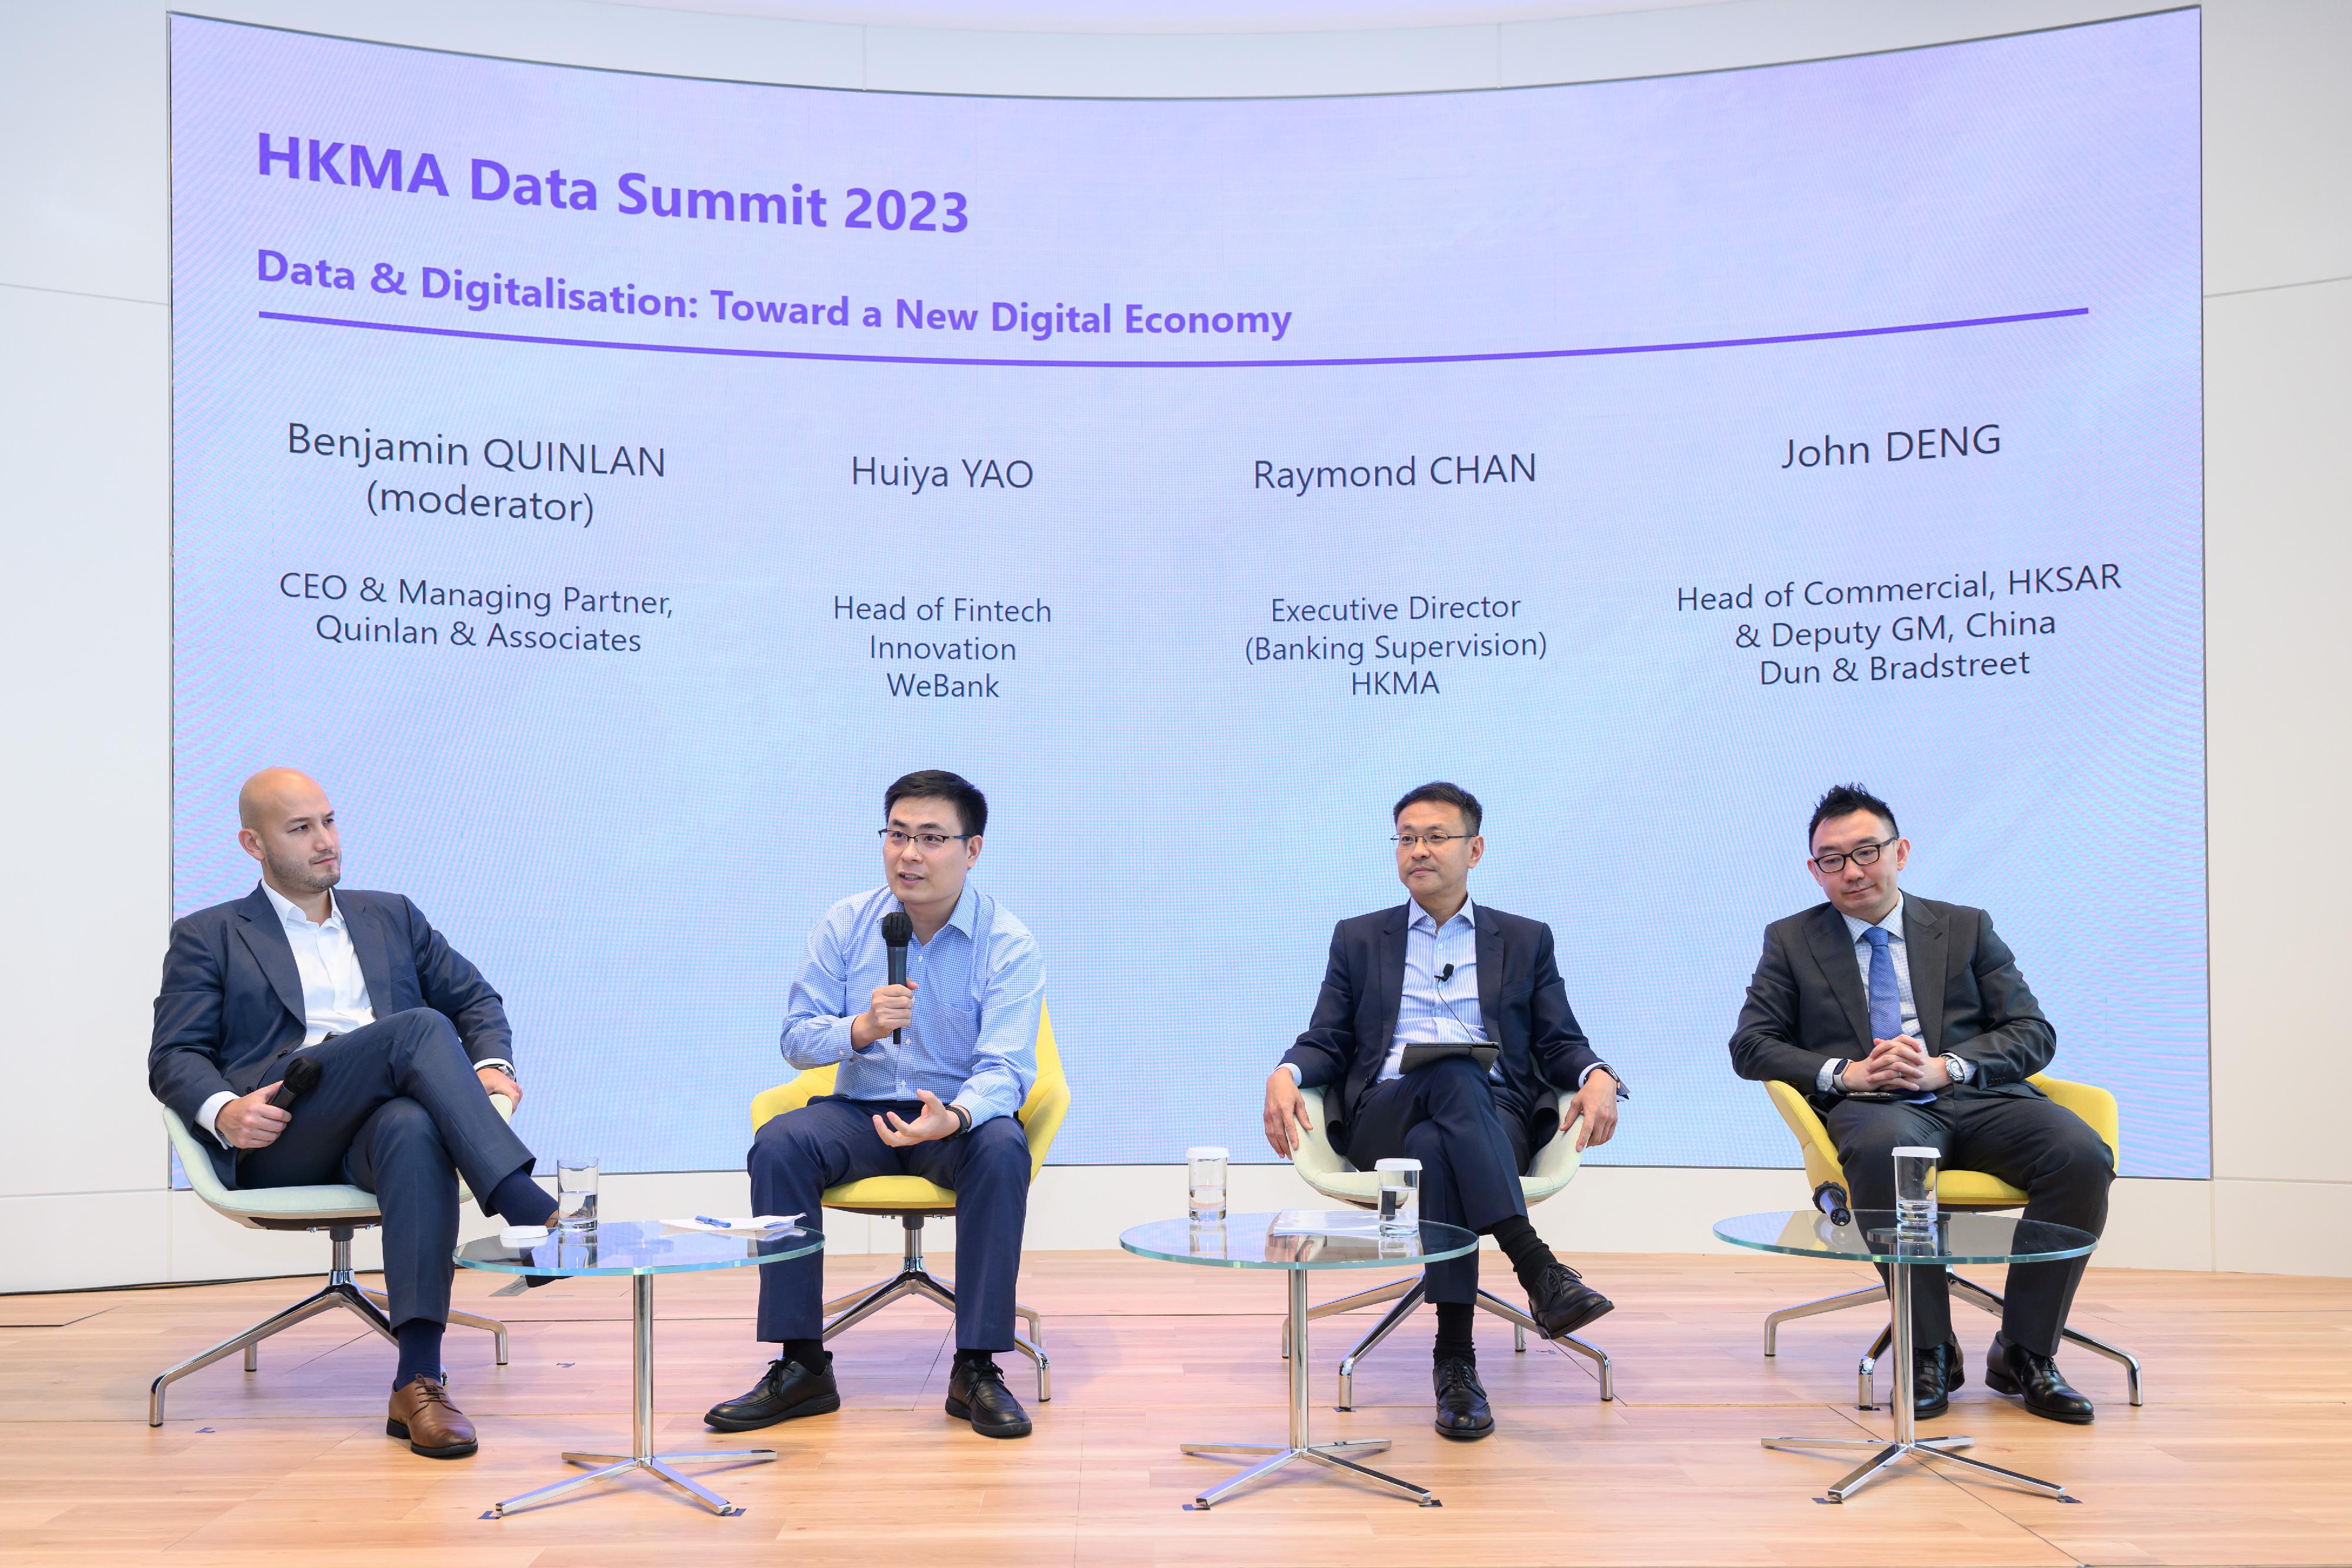 In the panel discussion titled "Data and Digitalisation: Towards a New Digital Economy" at the Data Summit today (May 4), the Executive Director (Banking Supervision) of the Hong Kong Monetary Authority, Mr Raymond Chan (second right); the Head of Commercial, HKSAR & Deputy General Manager, China of Dun & Bradstreet, Mr John Deng (first right); and the Head of Fintech Innovation of WeBank, Mr Yao Huiya (second left), share their views on how the financial services industry can seize the opportunity and strengthen its digital capabilities.